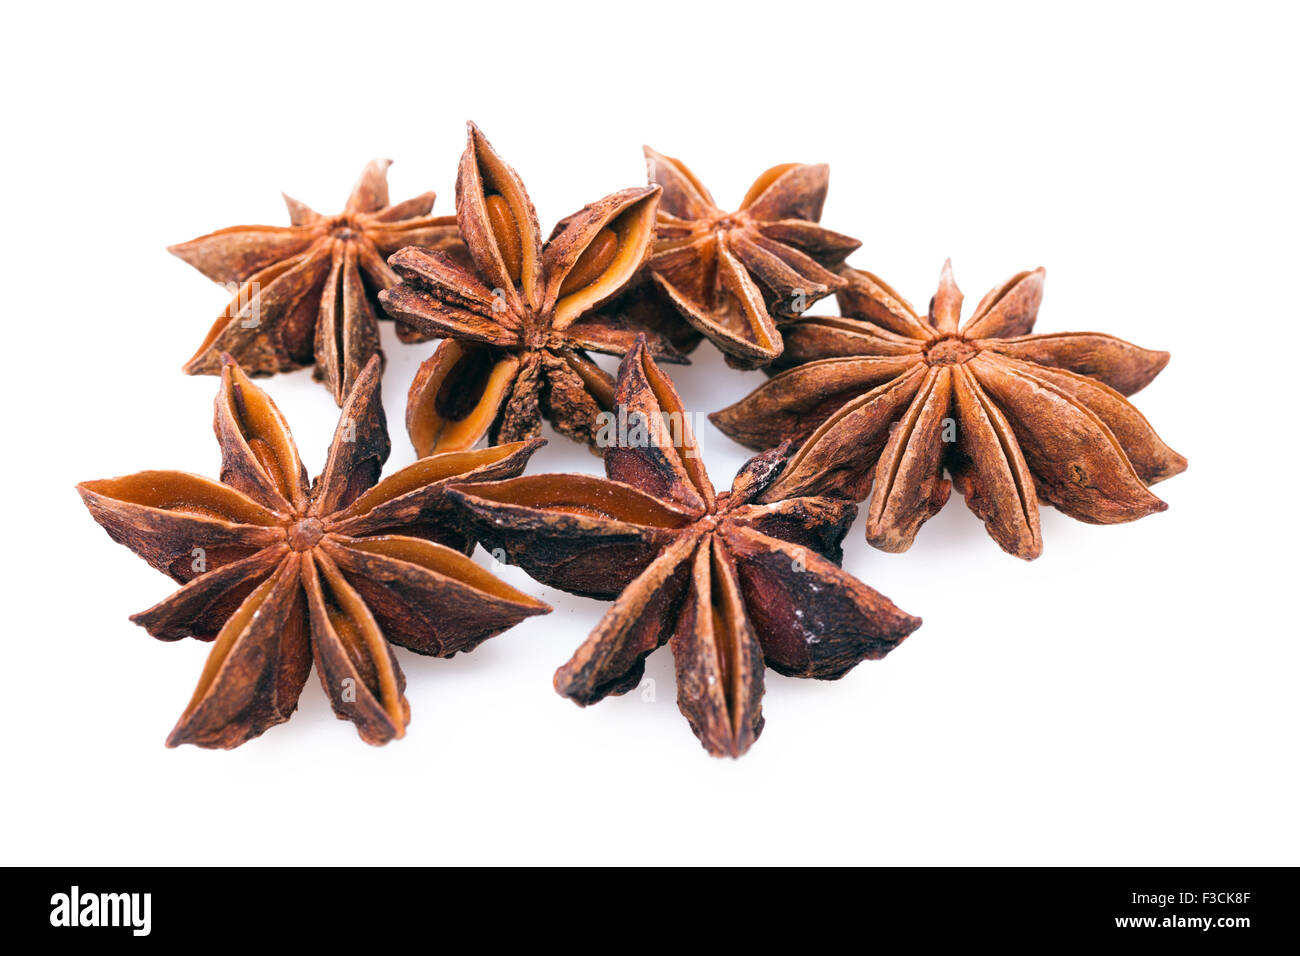 Anise stars on a white background Stock Photo